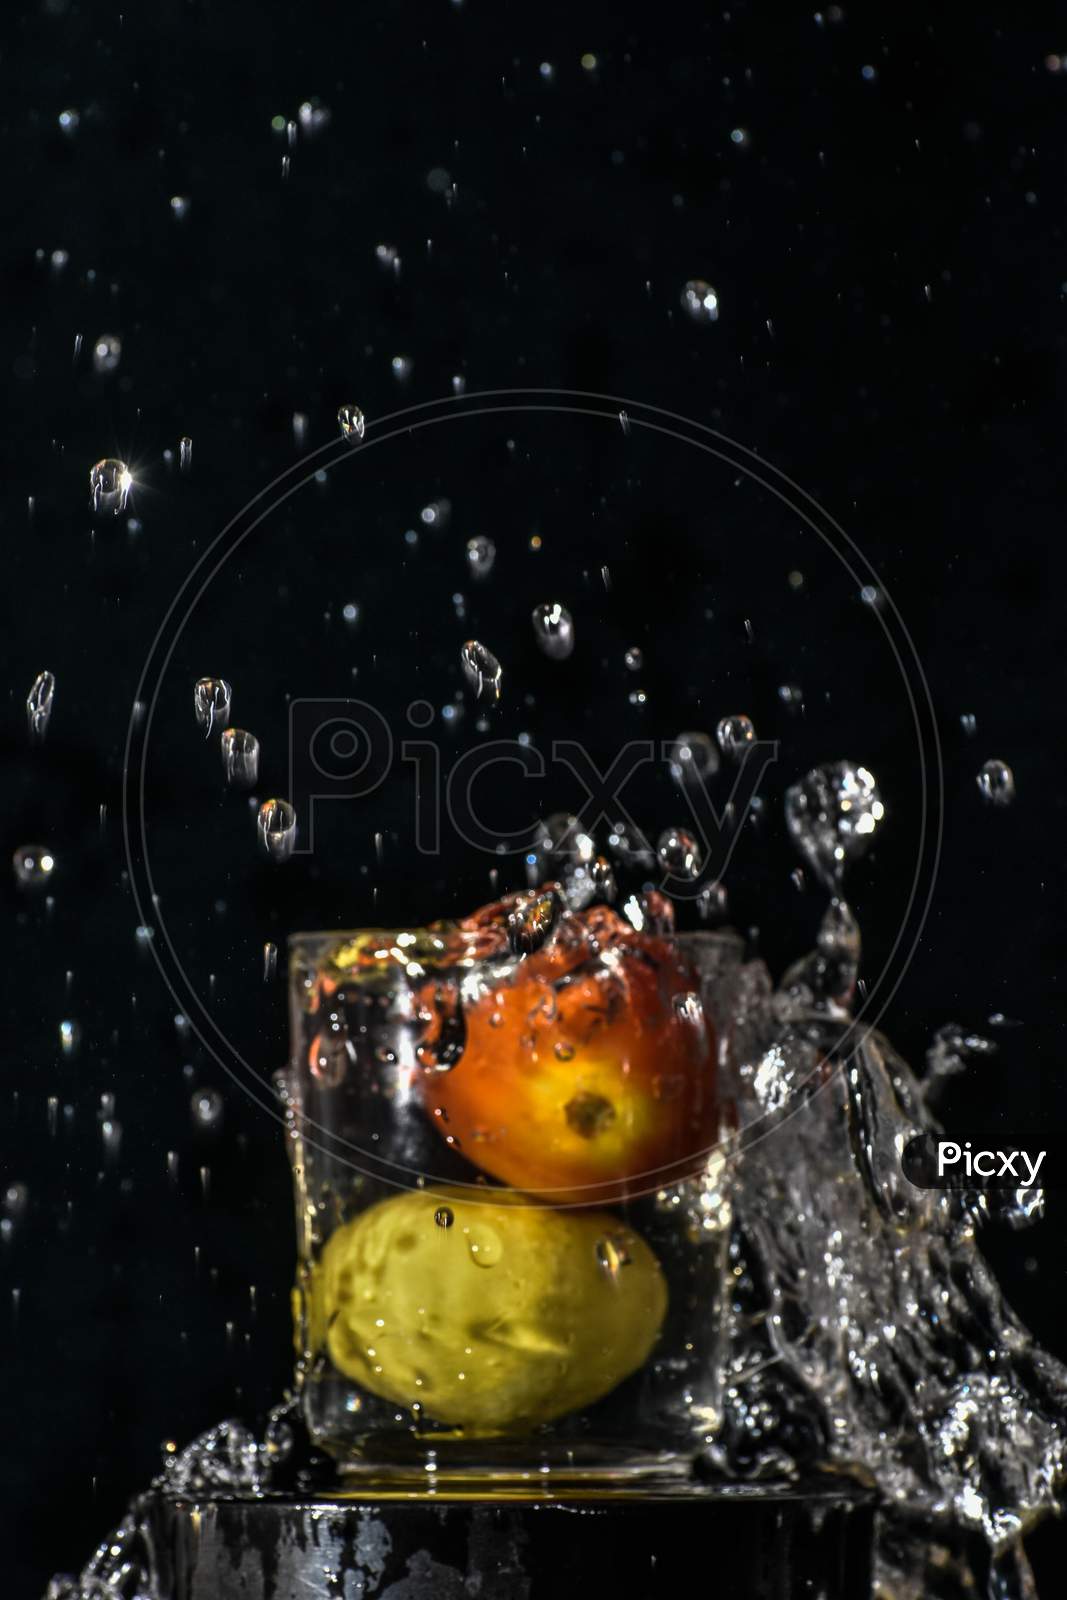 Splash Of Red Tomato And Yellow Lemon Dive Into Glass Of Water With Black Background